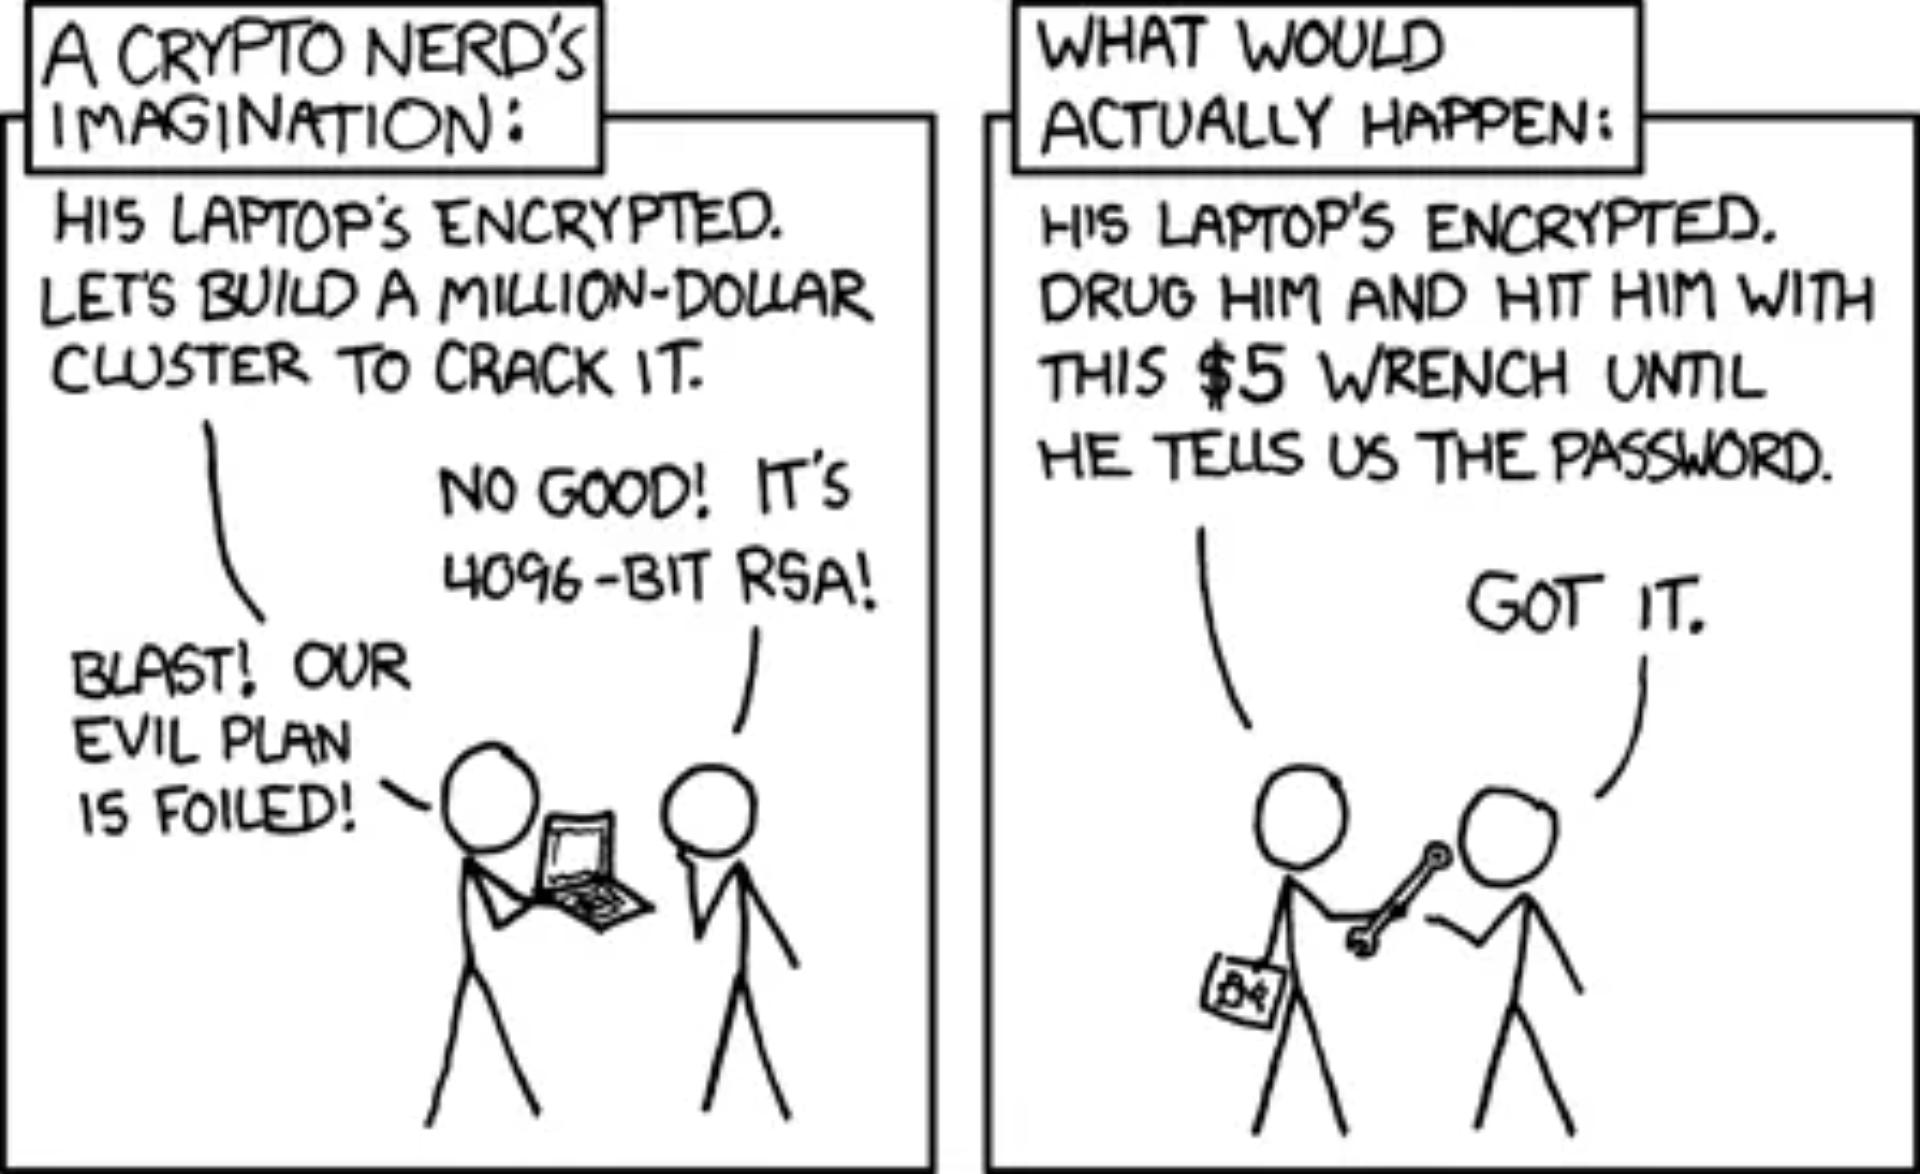 A cartoon showing the $5 wrench idea; a crypto nerd's plan to foil hackers with an encrypted laptop and the reality of a thief who will resort to violence to get the password 